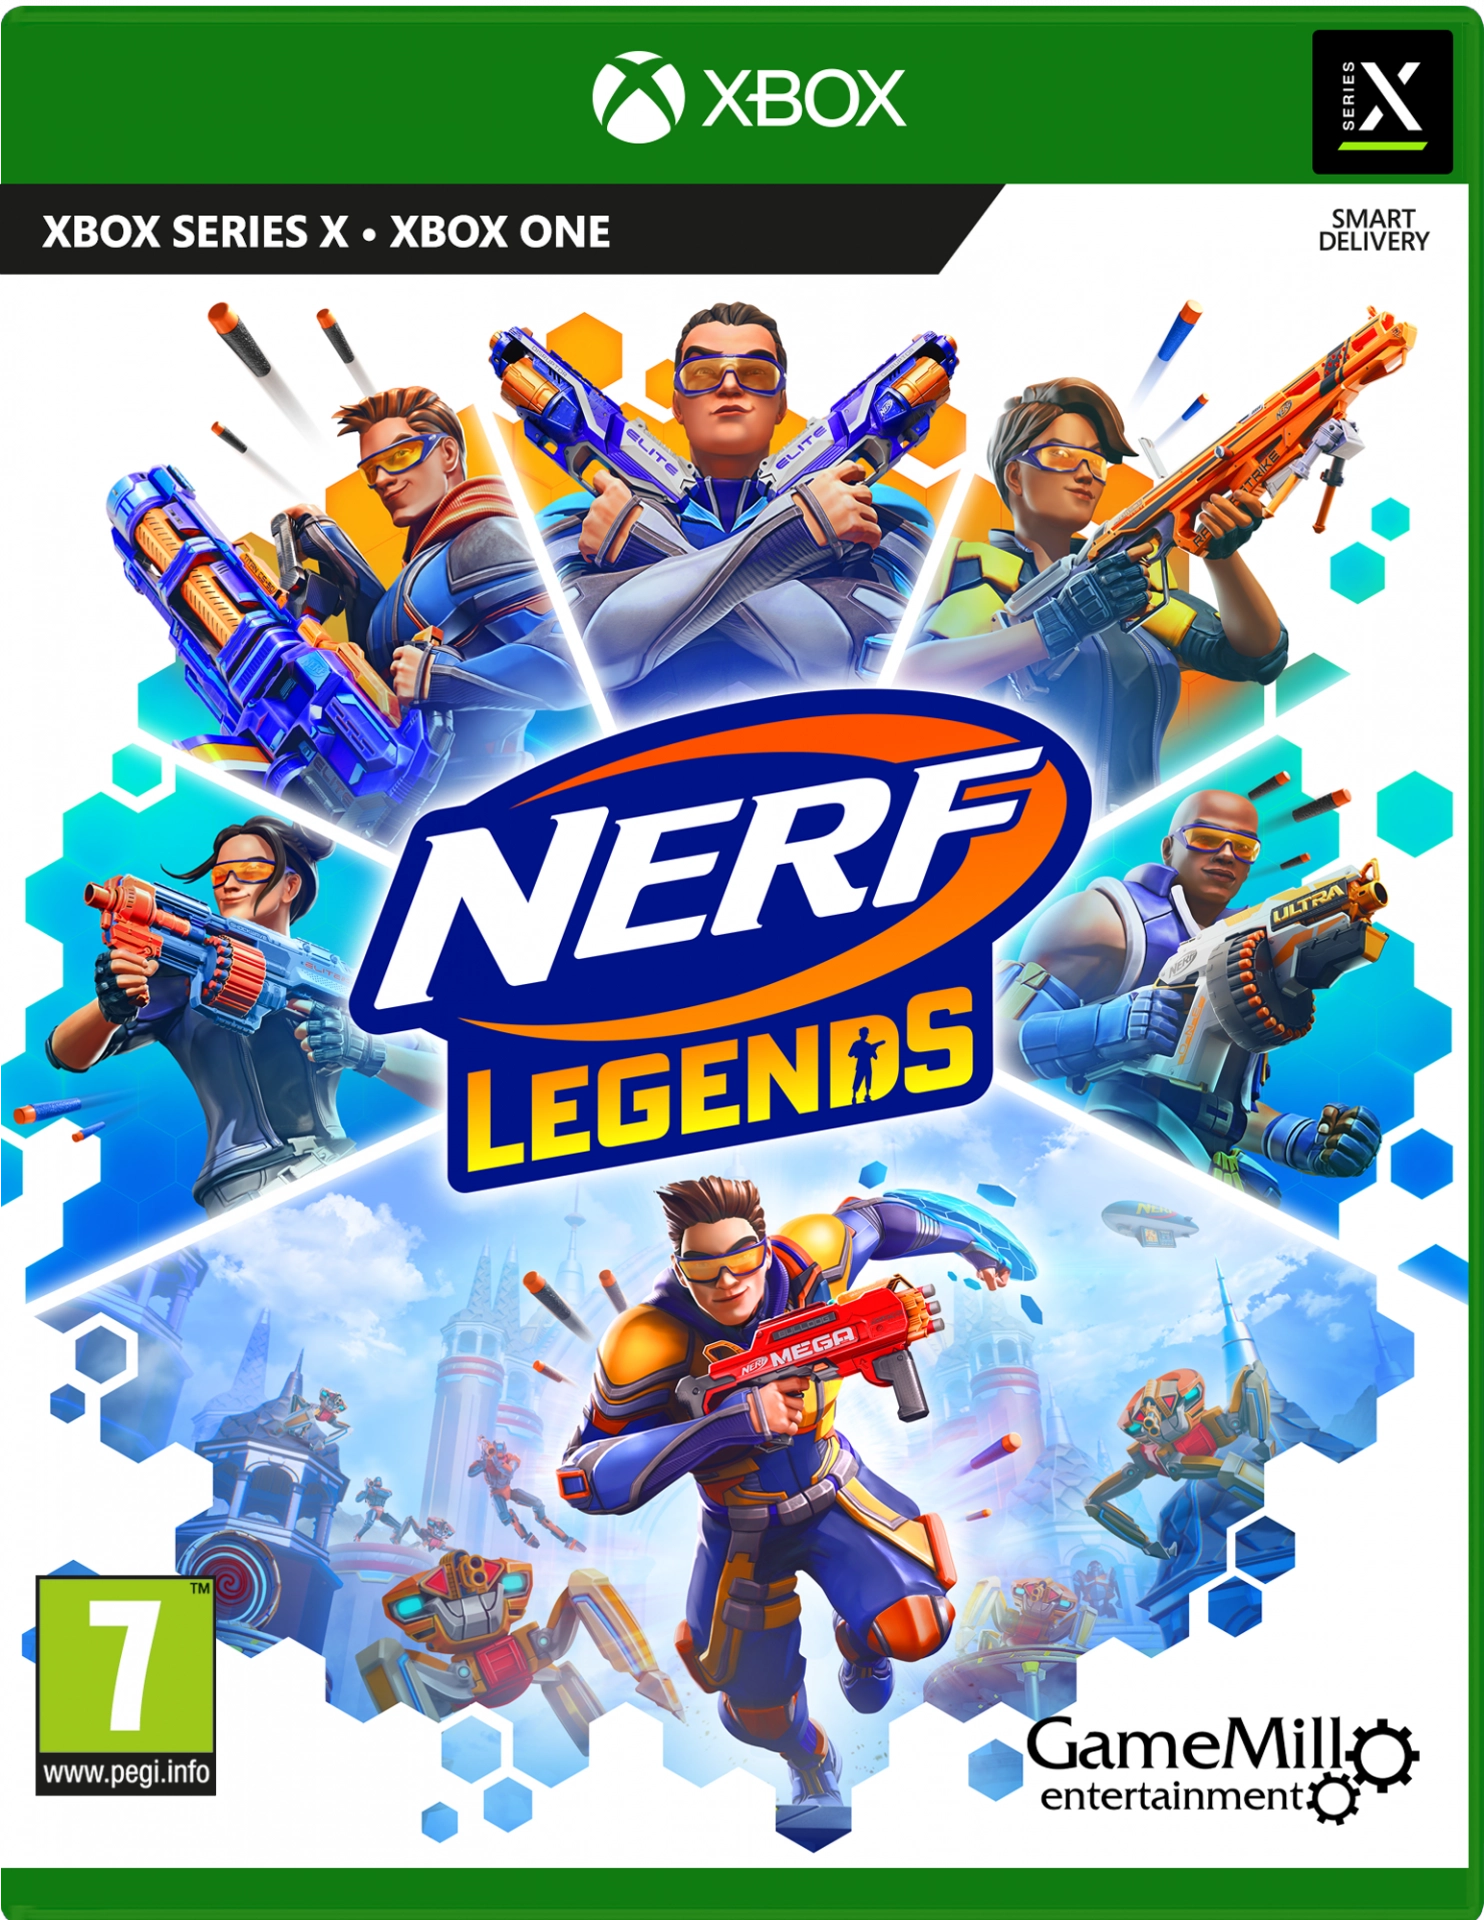 NERF Legends (Xbox One), GameMill Entertainment